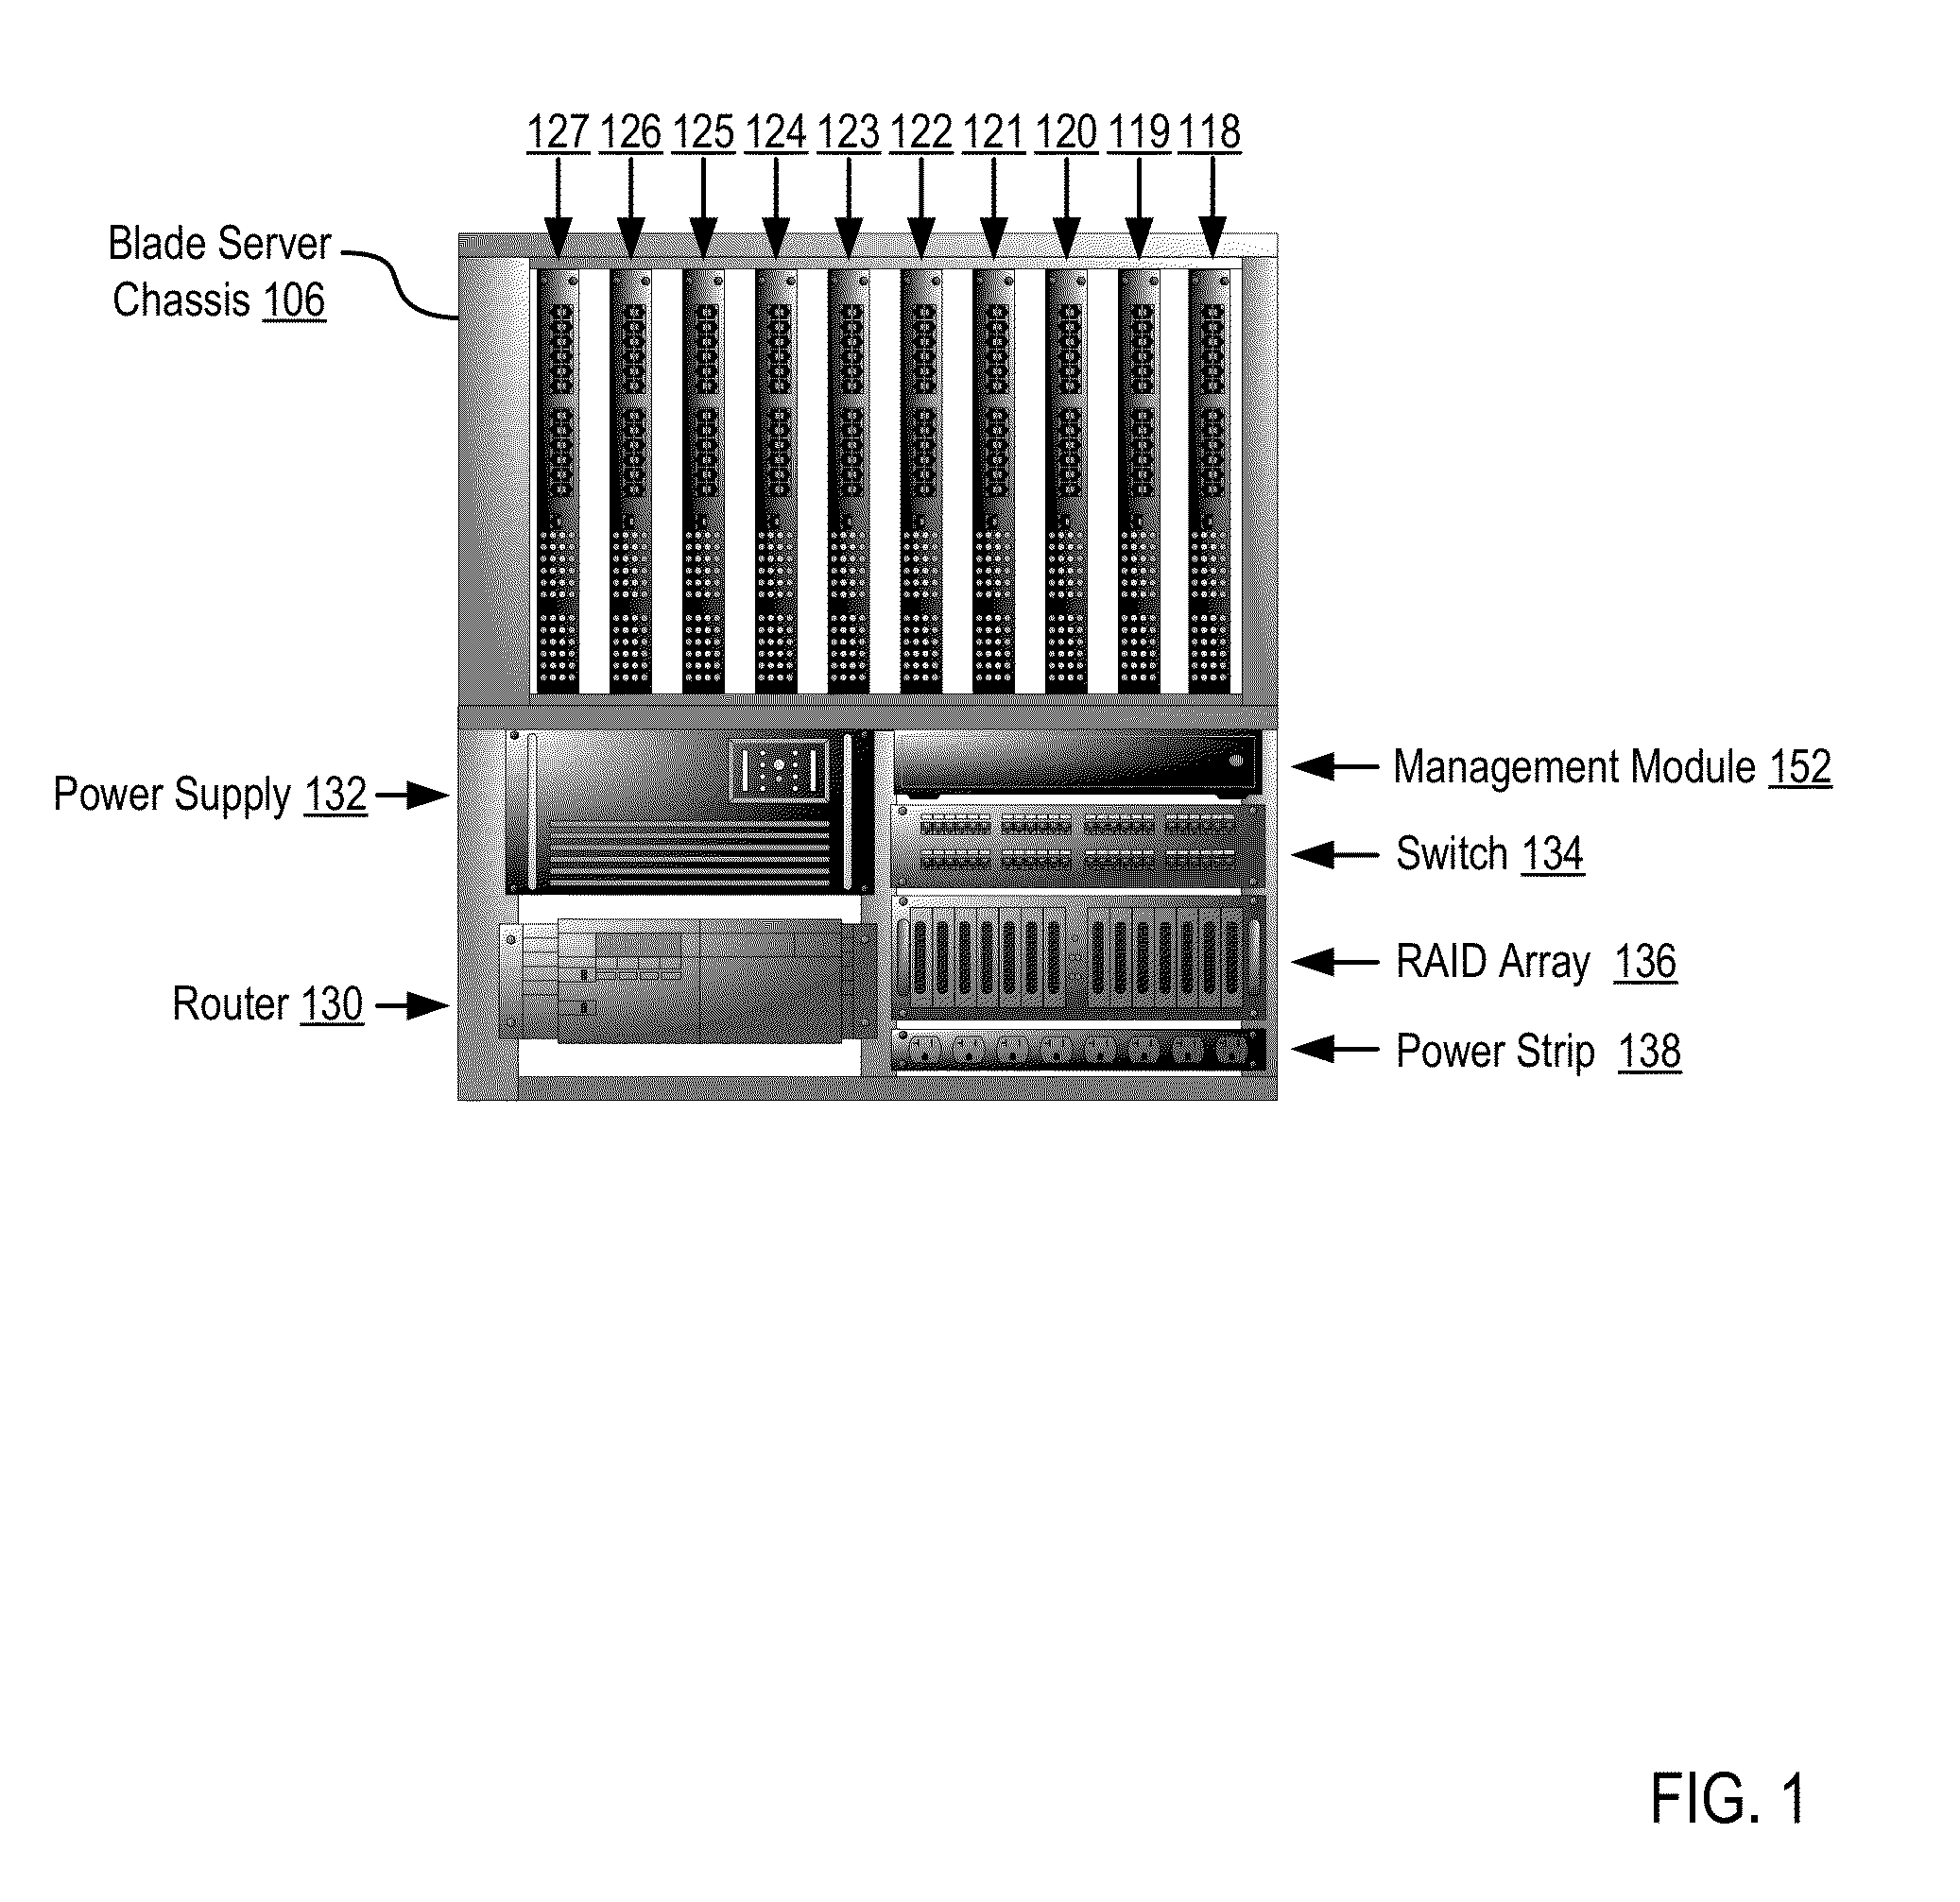 Managing stability of a link coupling an adapter of a computing system to a port of a networking device for in-band data communications